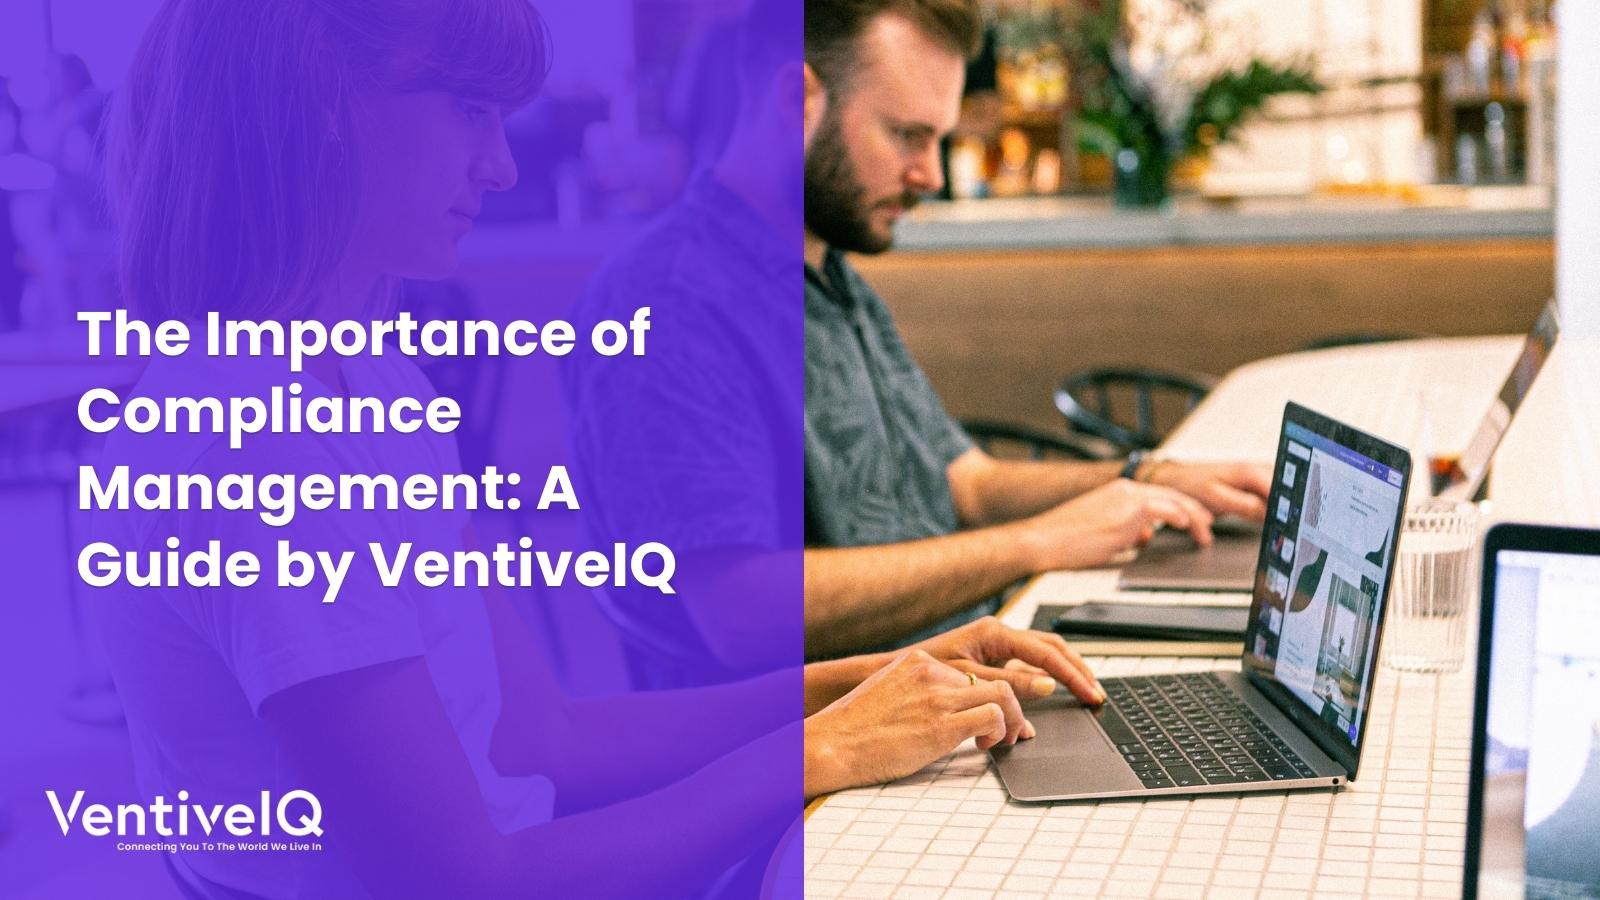 The Importance of Compliance Management: A Guide by VentiveIQ